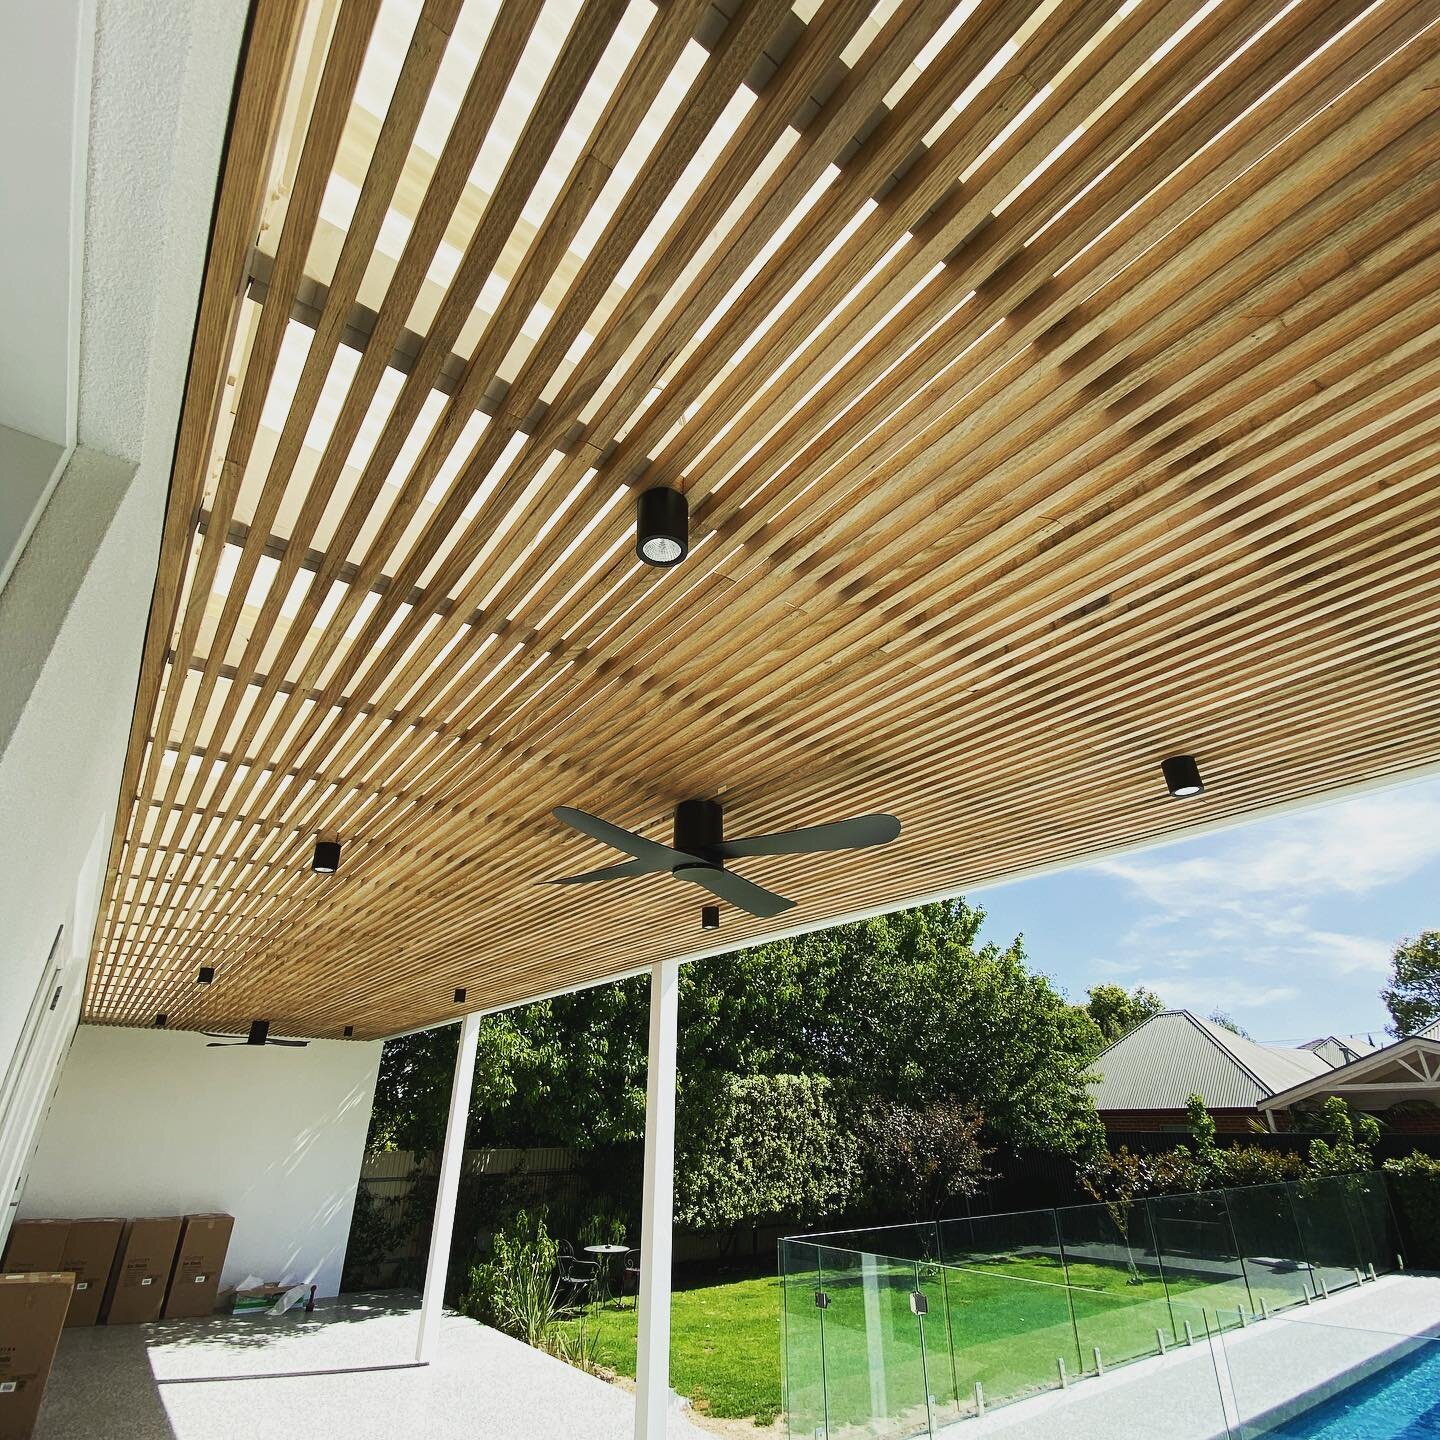 Black surface spots &amp; black fans on this awesome timber lined pergola #electrician #electricianlife #lightingtrendz #adelaide #pergolalights